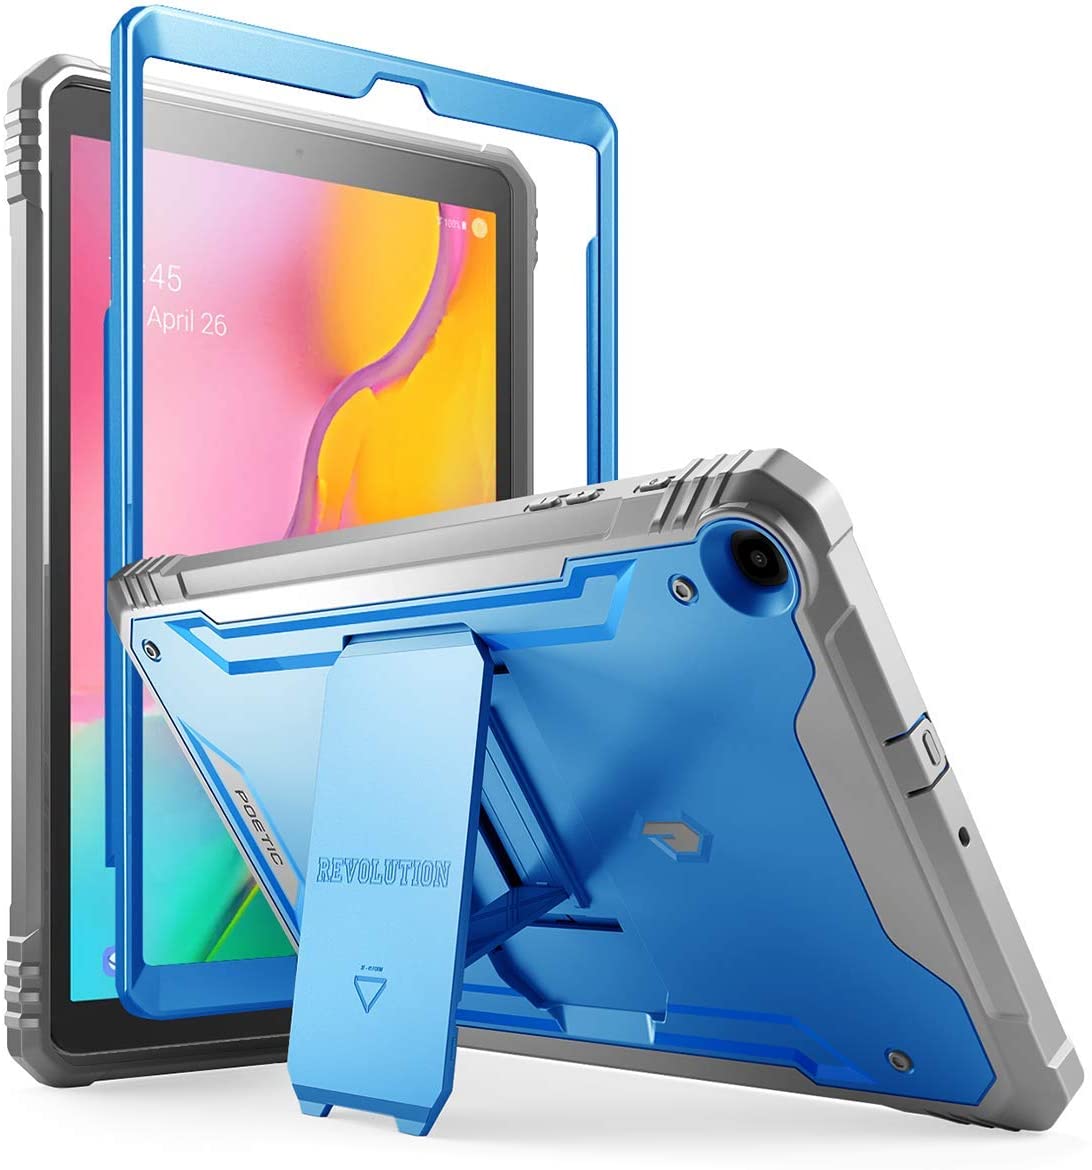 Galaxy Tab A 10.1 2019 Rugged Case with Kickstand, SM-T510/T515, Poetic Full Body Shockproof Cover. - e4cents